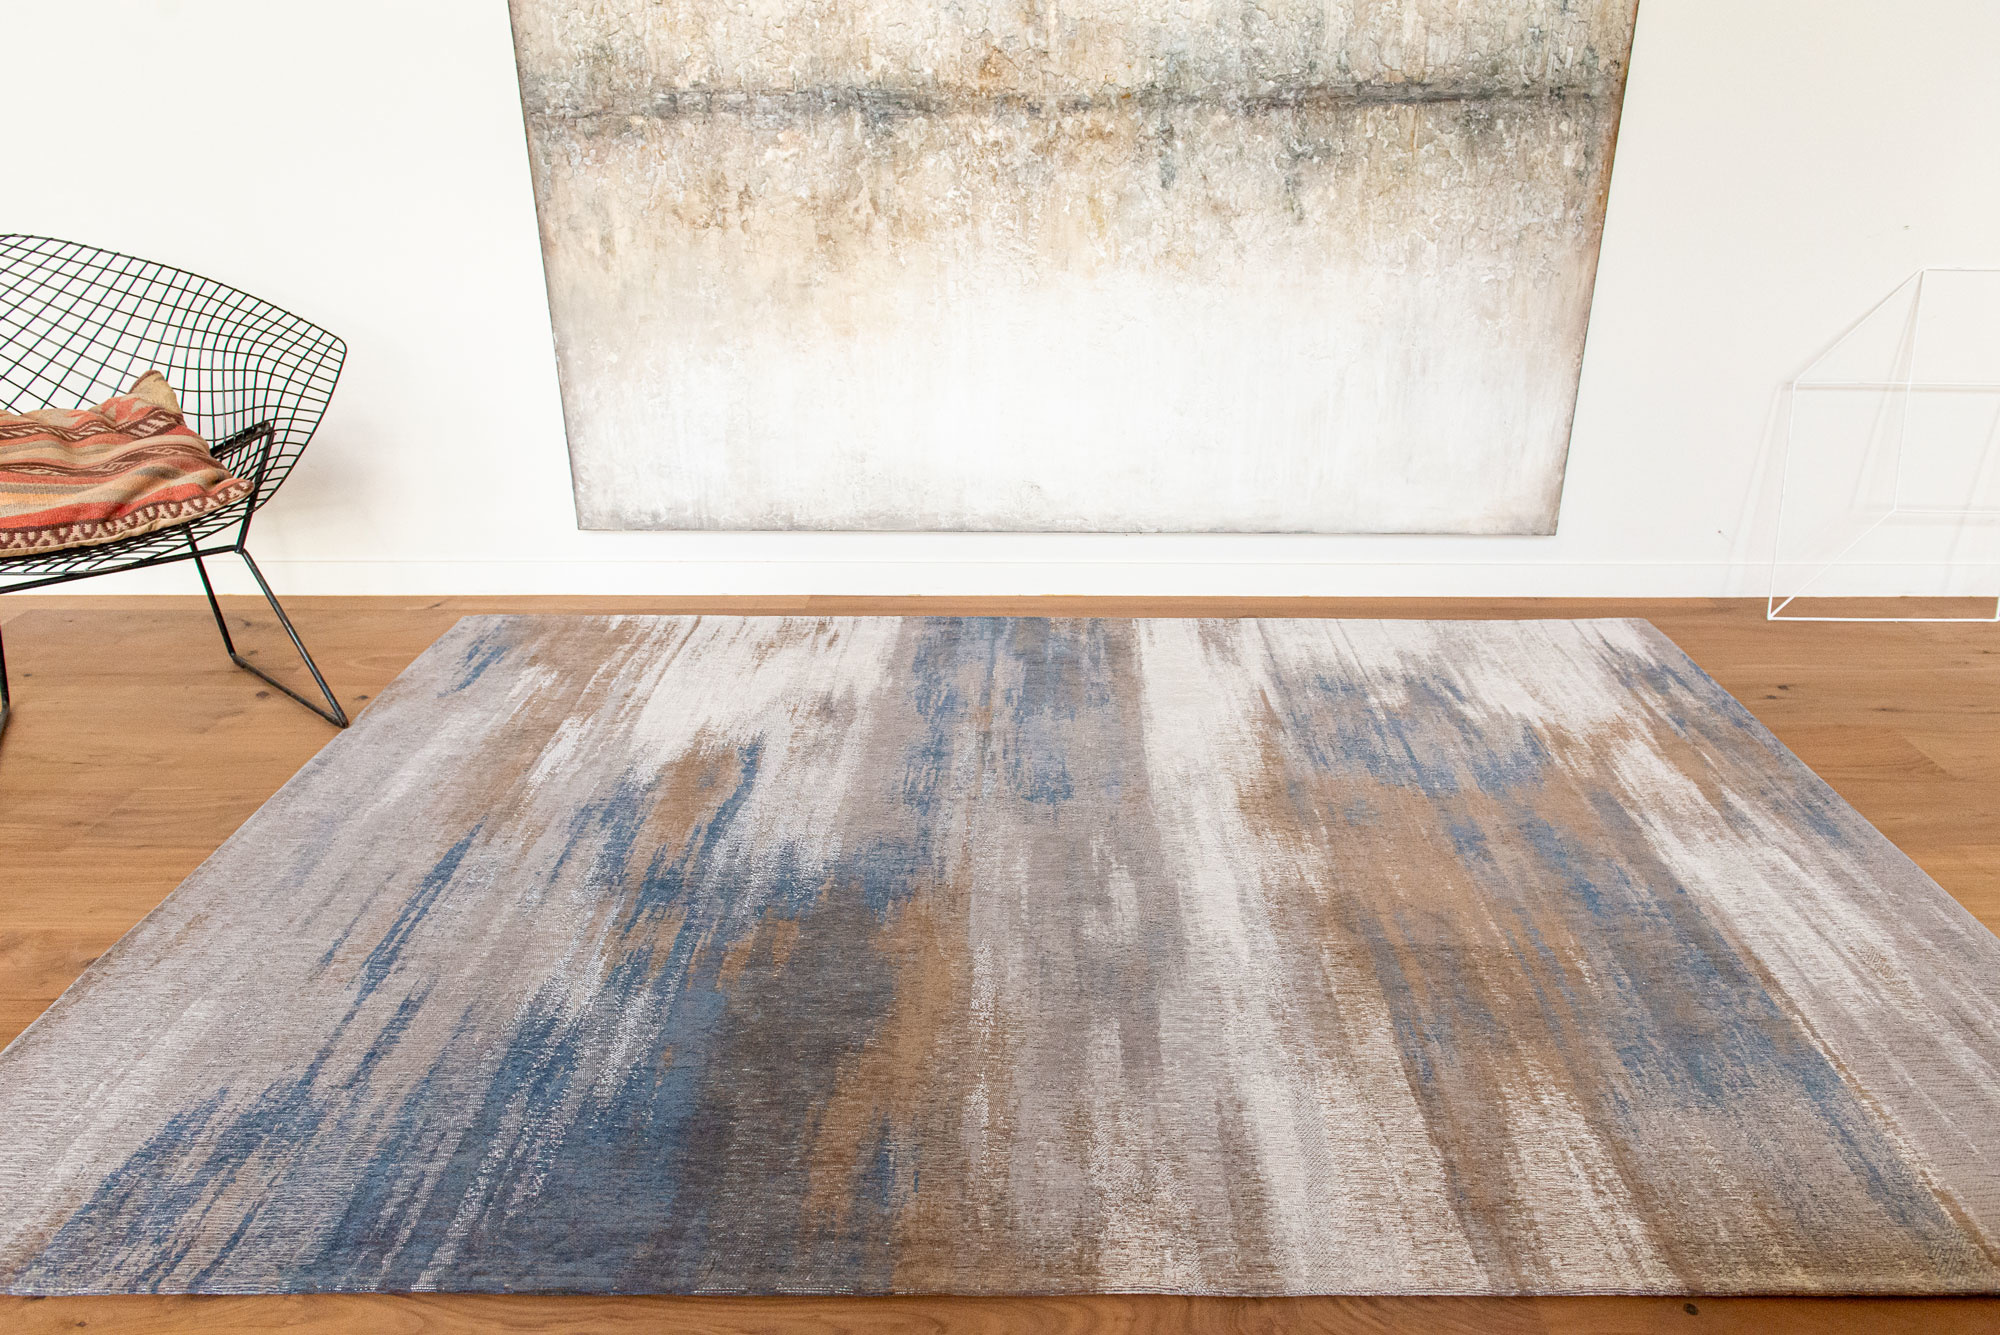 Abstract Flatwoven Grey Rug ☞ Size: 7' 7" x 11' (230 x 330 cm)